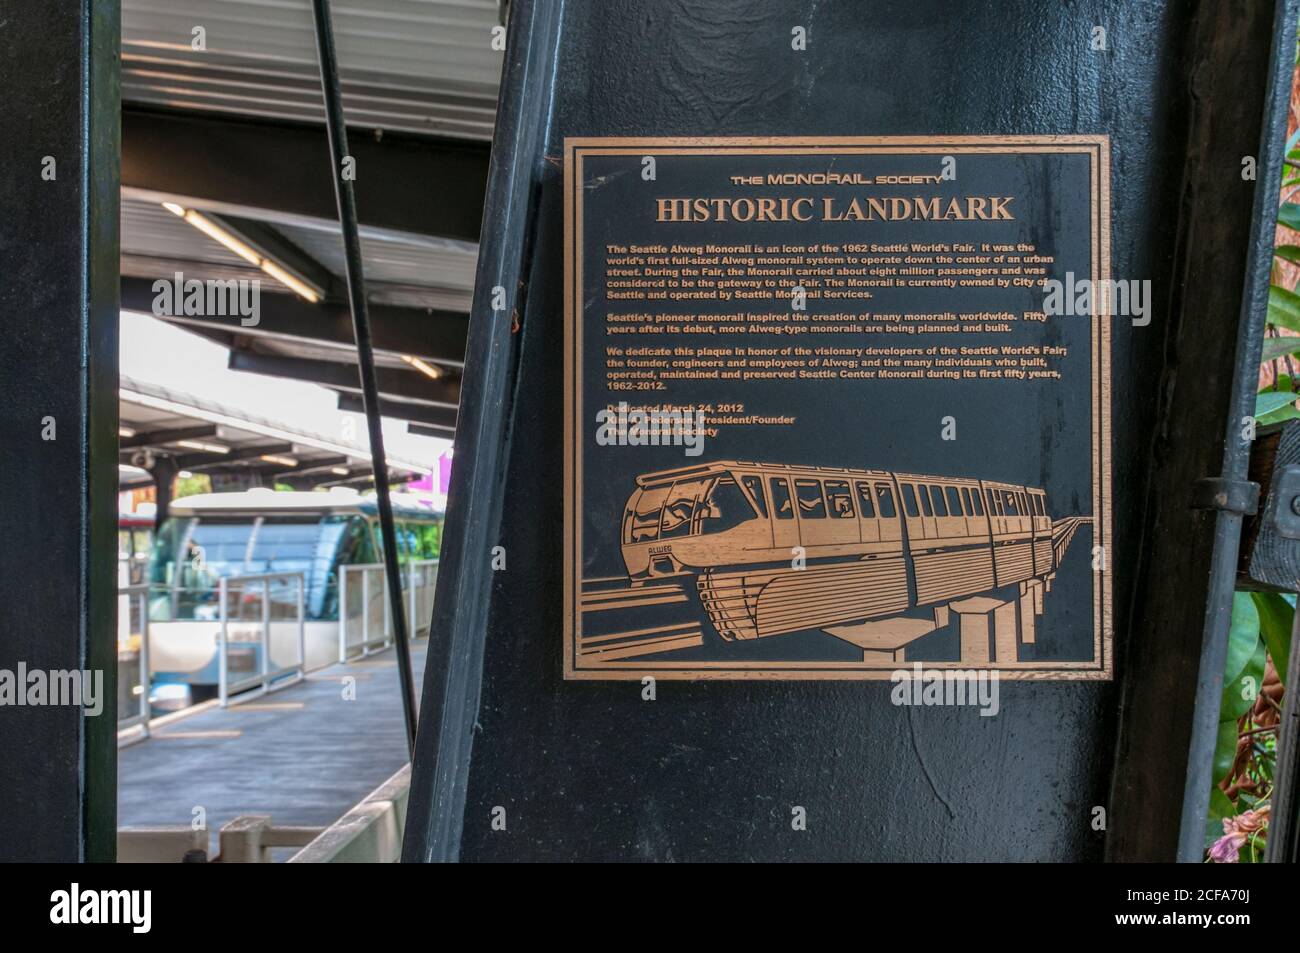 A plaque at the Seattle Monorail commemorates it as an Historic Landmark. Stock Photo